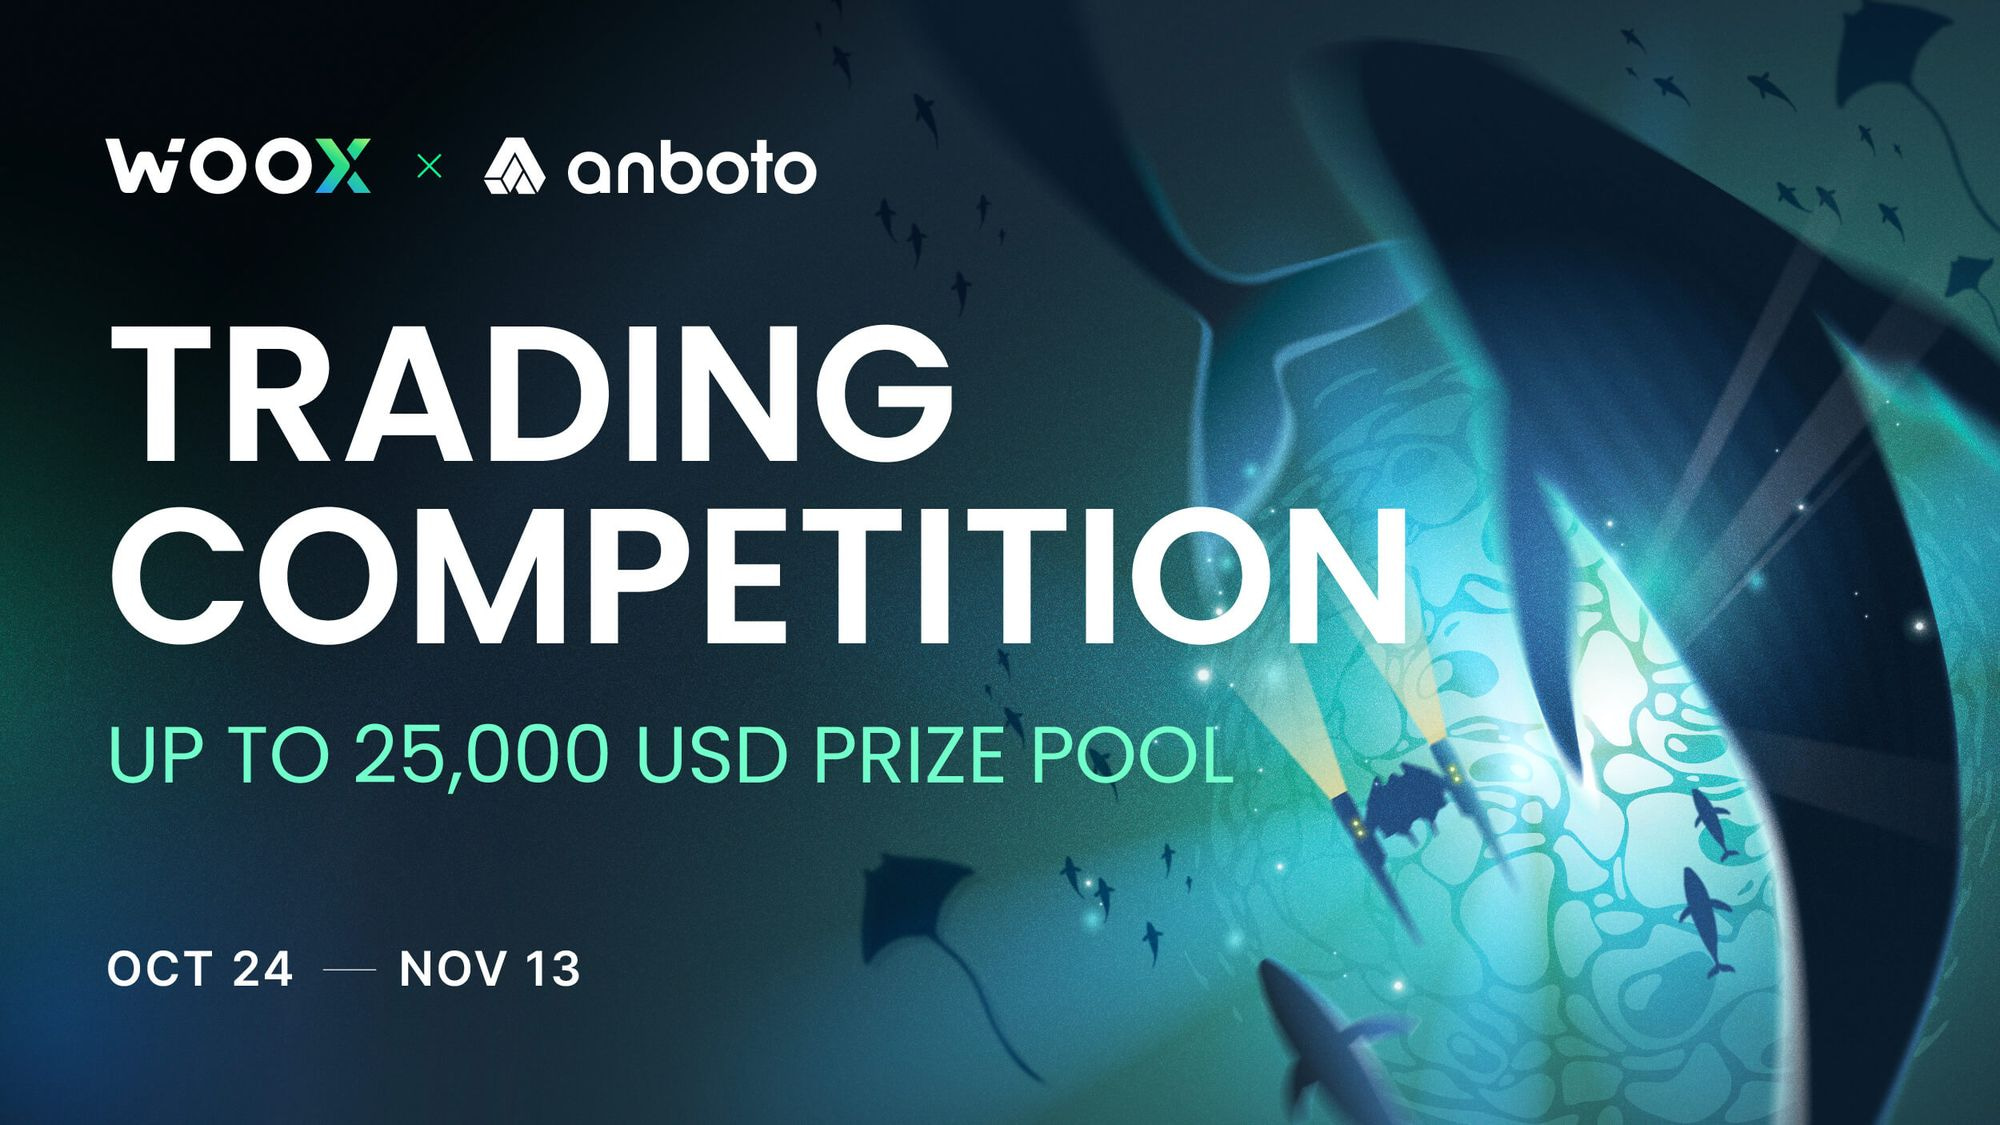 Trading Competition: WOO X / Anboto